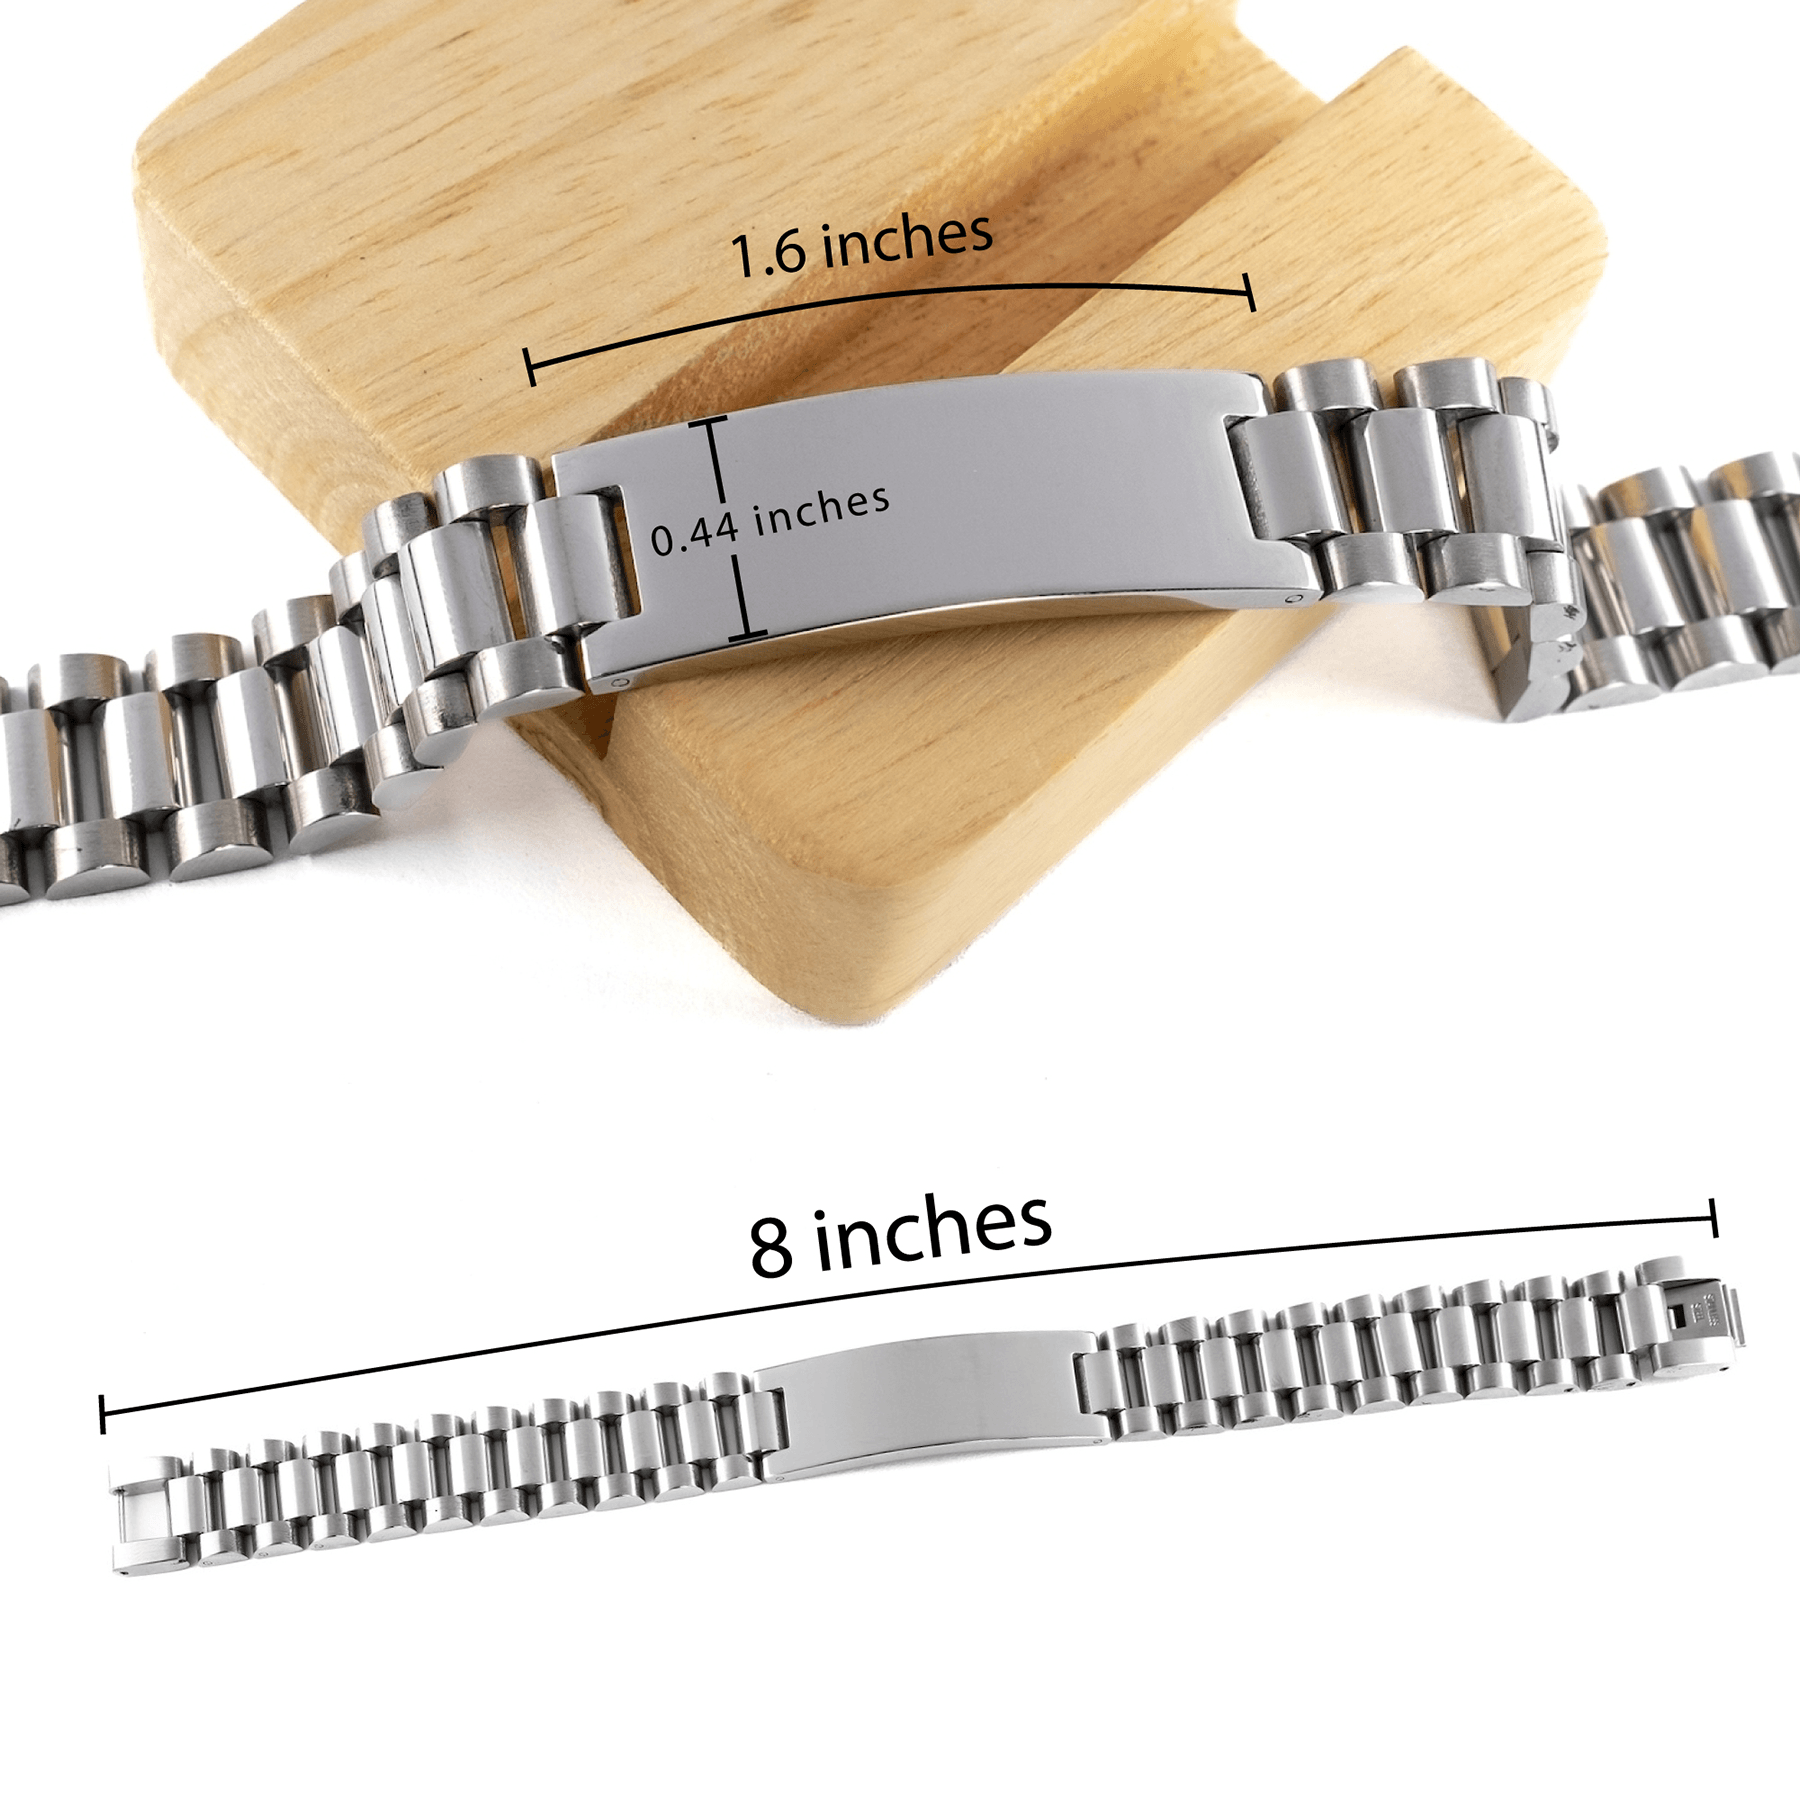 Remarkable Case Manager Gifts, Your dedication and hard work, Inspirational Birthday Christmas Unique Ladder Stainless Steel Bracelet For Case Manager, Coworkers, Men, Women, Friends - Mallard Moon Gift Shop